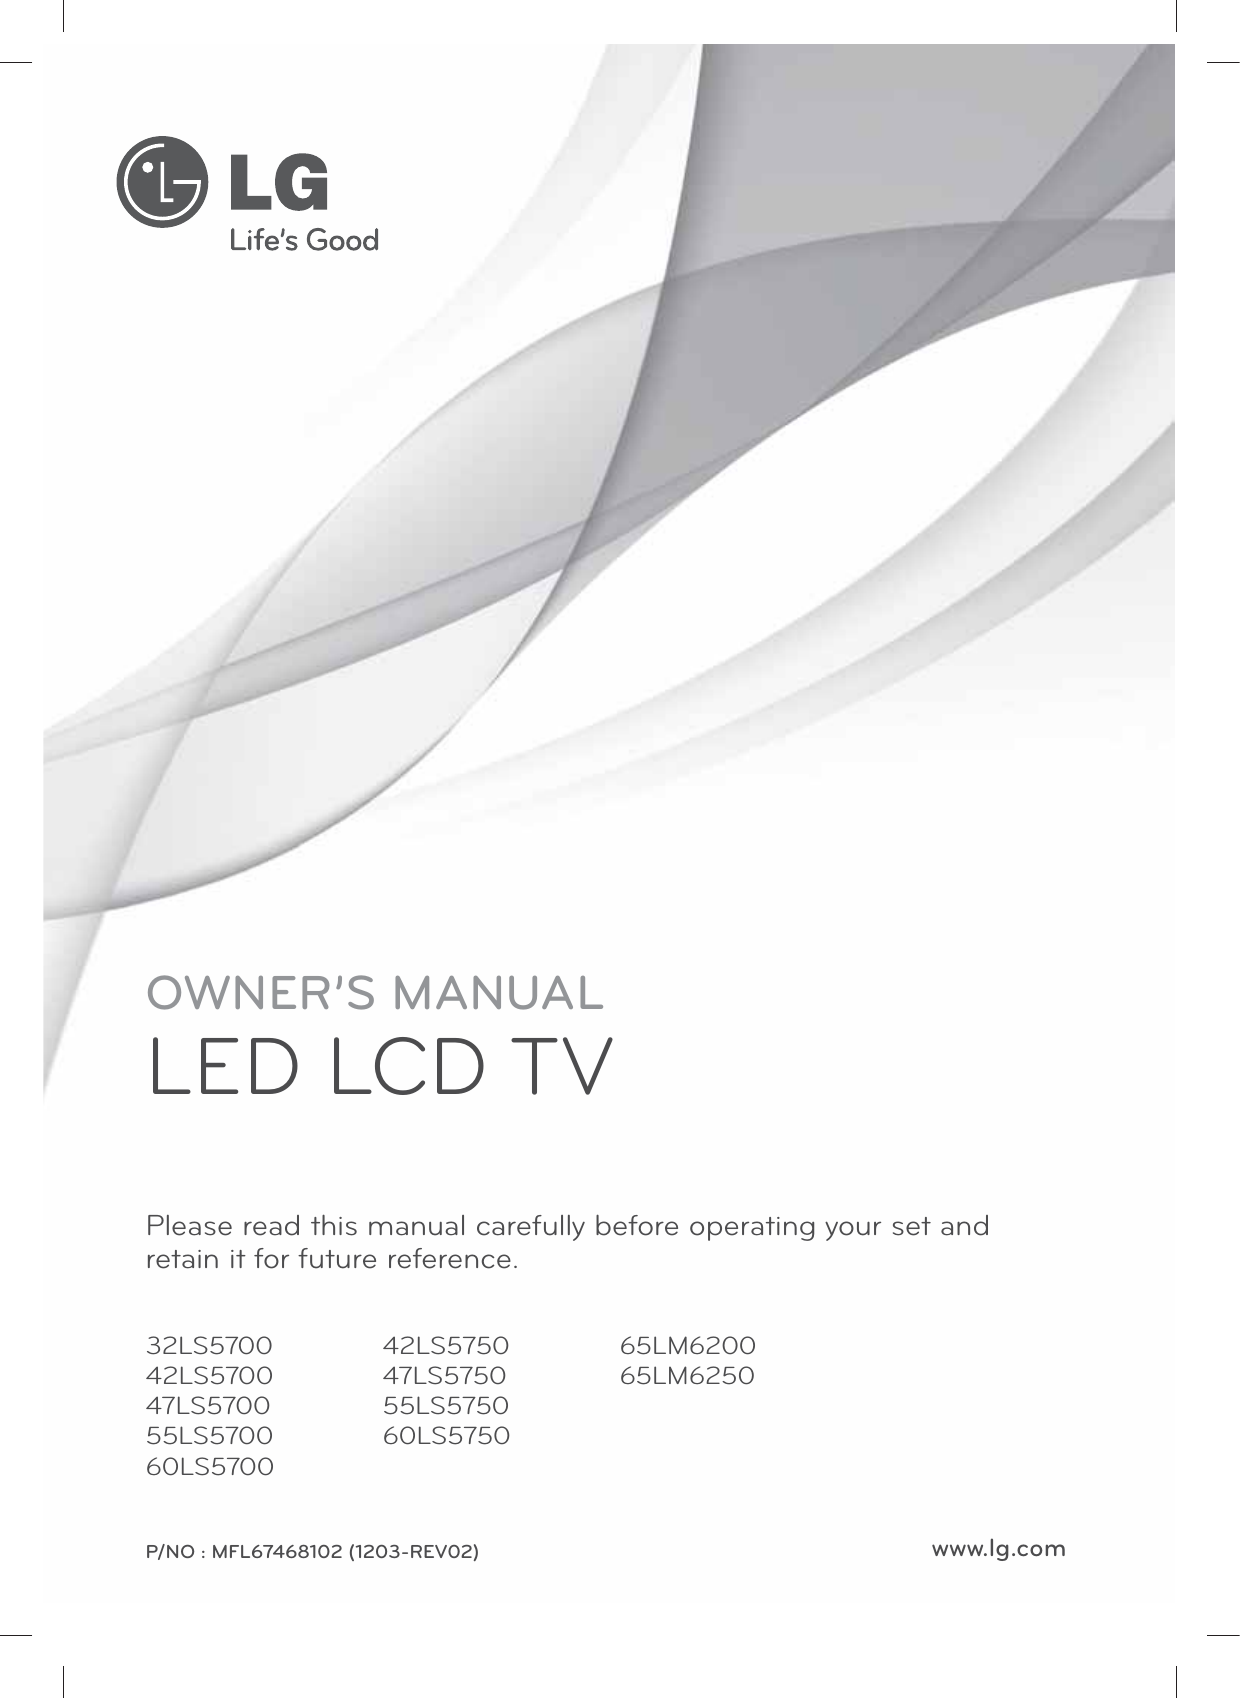 www.lg.comOWNER’S MANUALLED LCD TVPlease read this manual carefully before operating your set and retain it for future reference.32LS570042LS570047LS570055LS570060LS570042LS575047LS575055LS575060LS575065LM620065LM6250P/NO : MFL67468102 (1203-REV02)